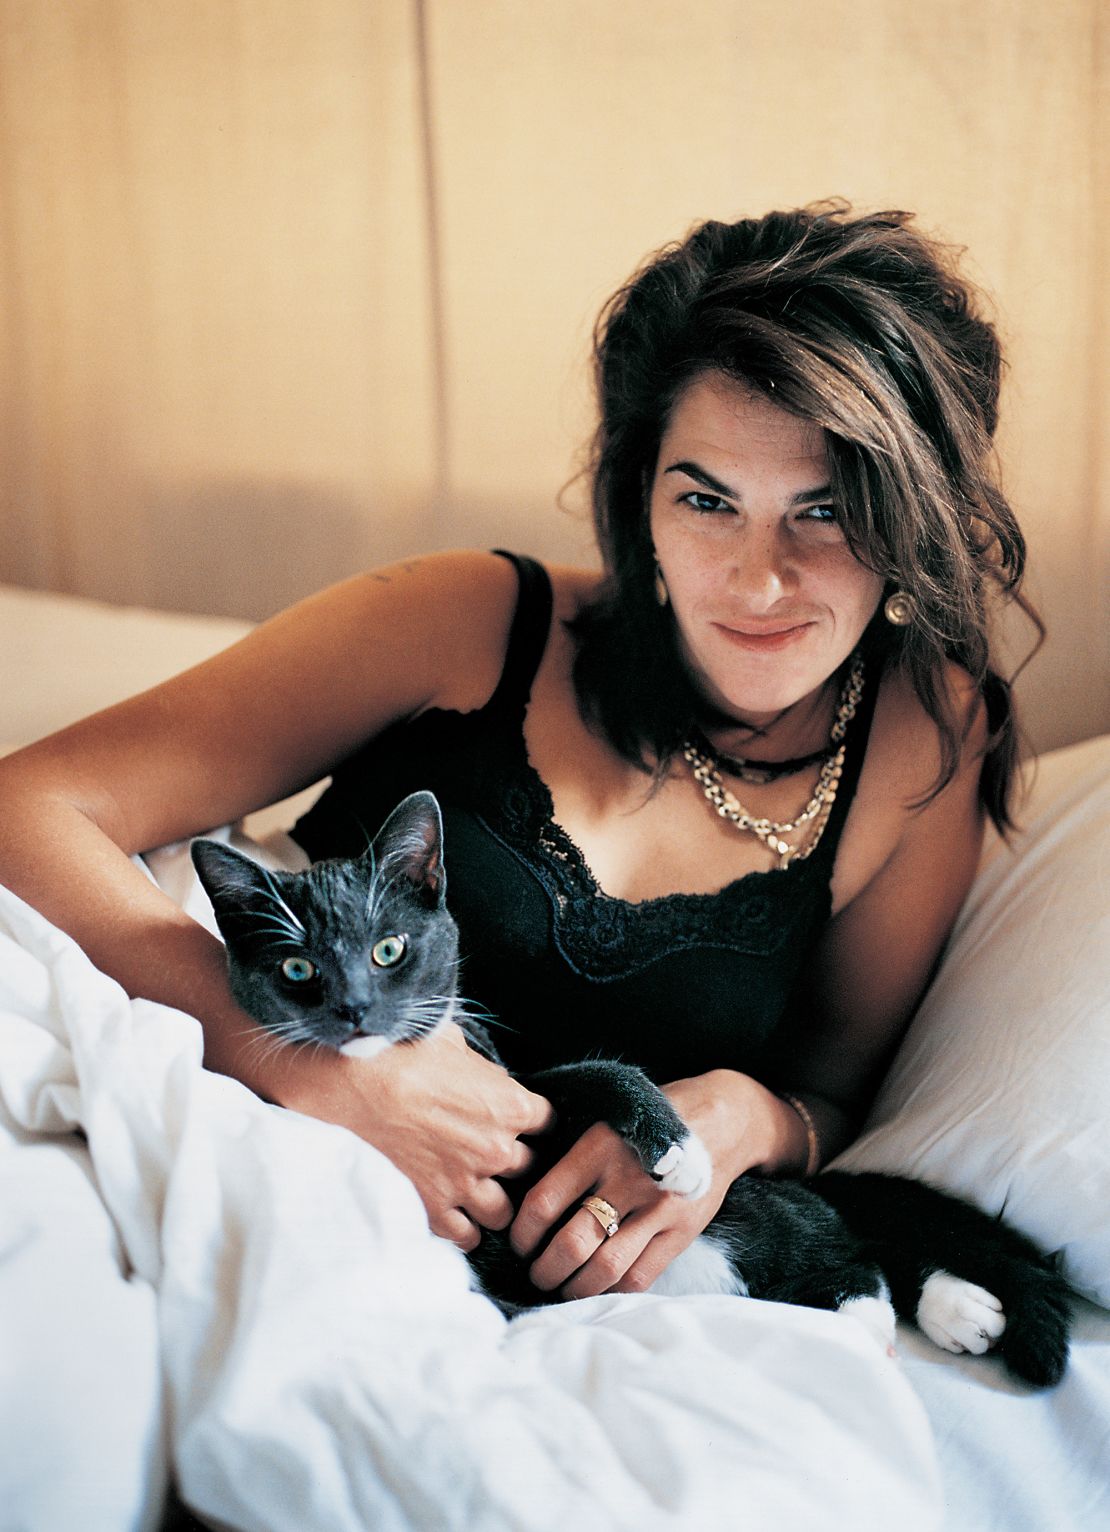 Earlier on the same day, McCartney photographed Emin in her own bed with her beloved cat Docket.